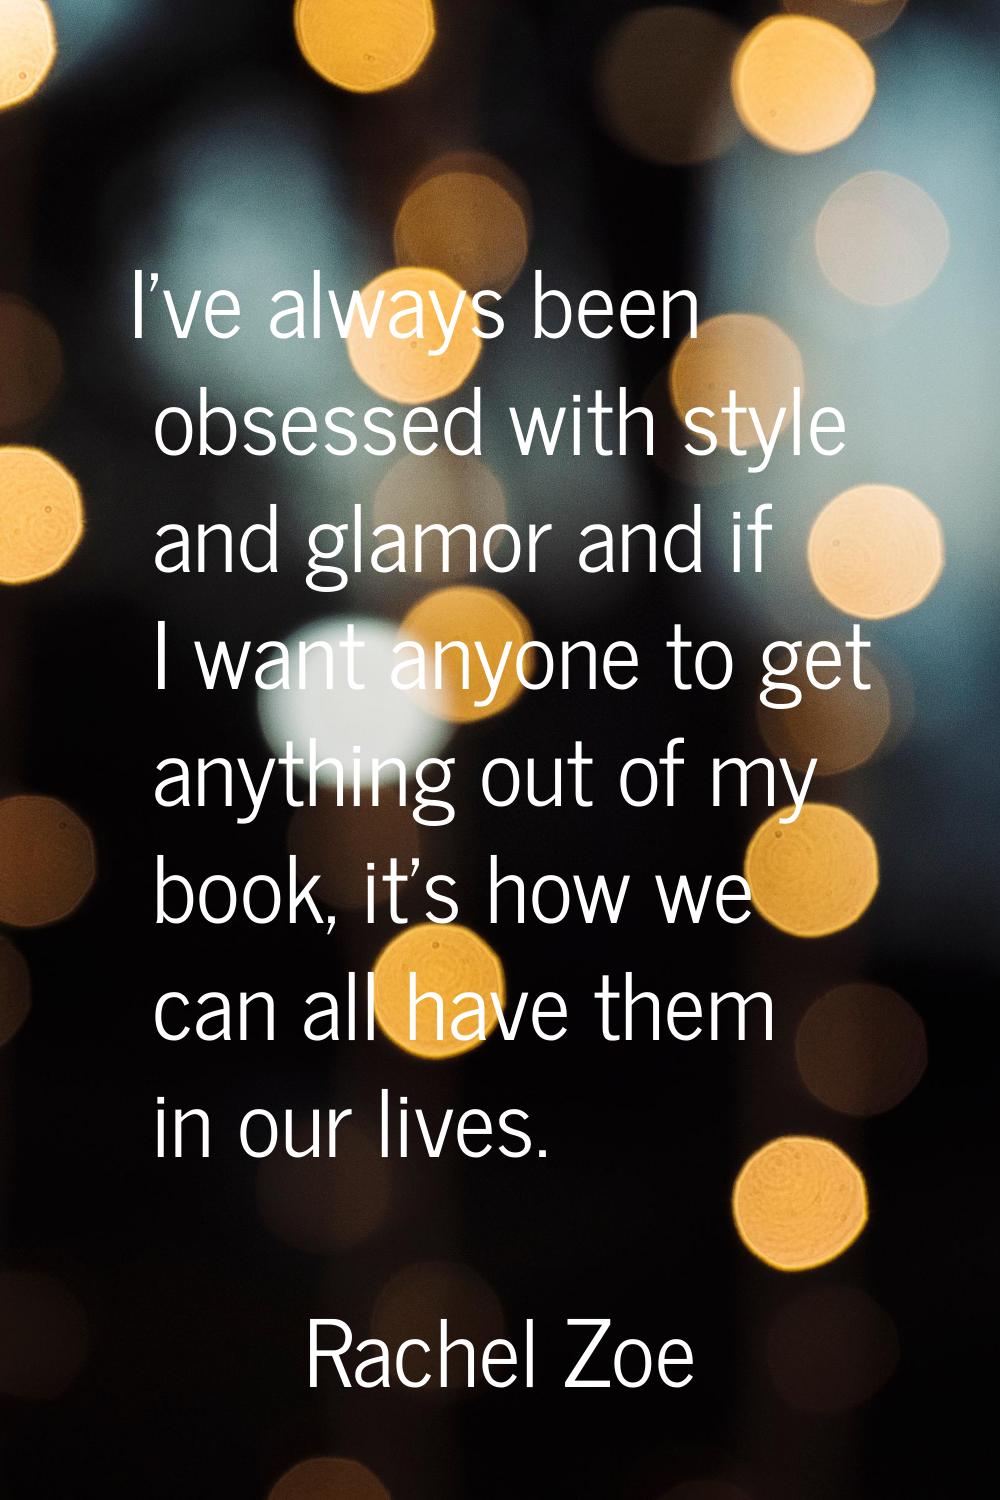 I've always been obsessed with style and glamor and if I want anyone to get anything out of my book